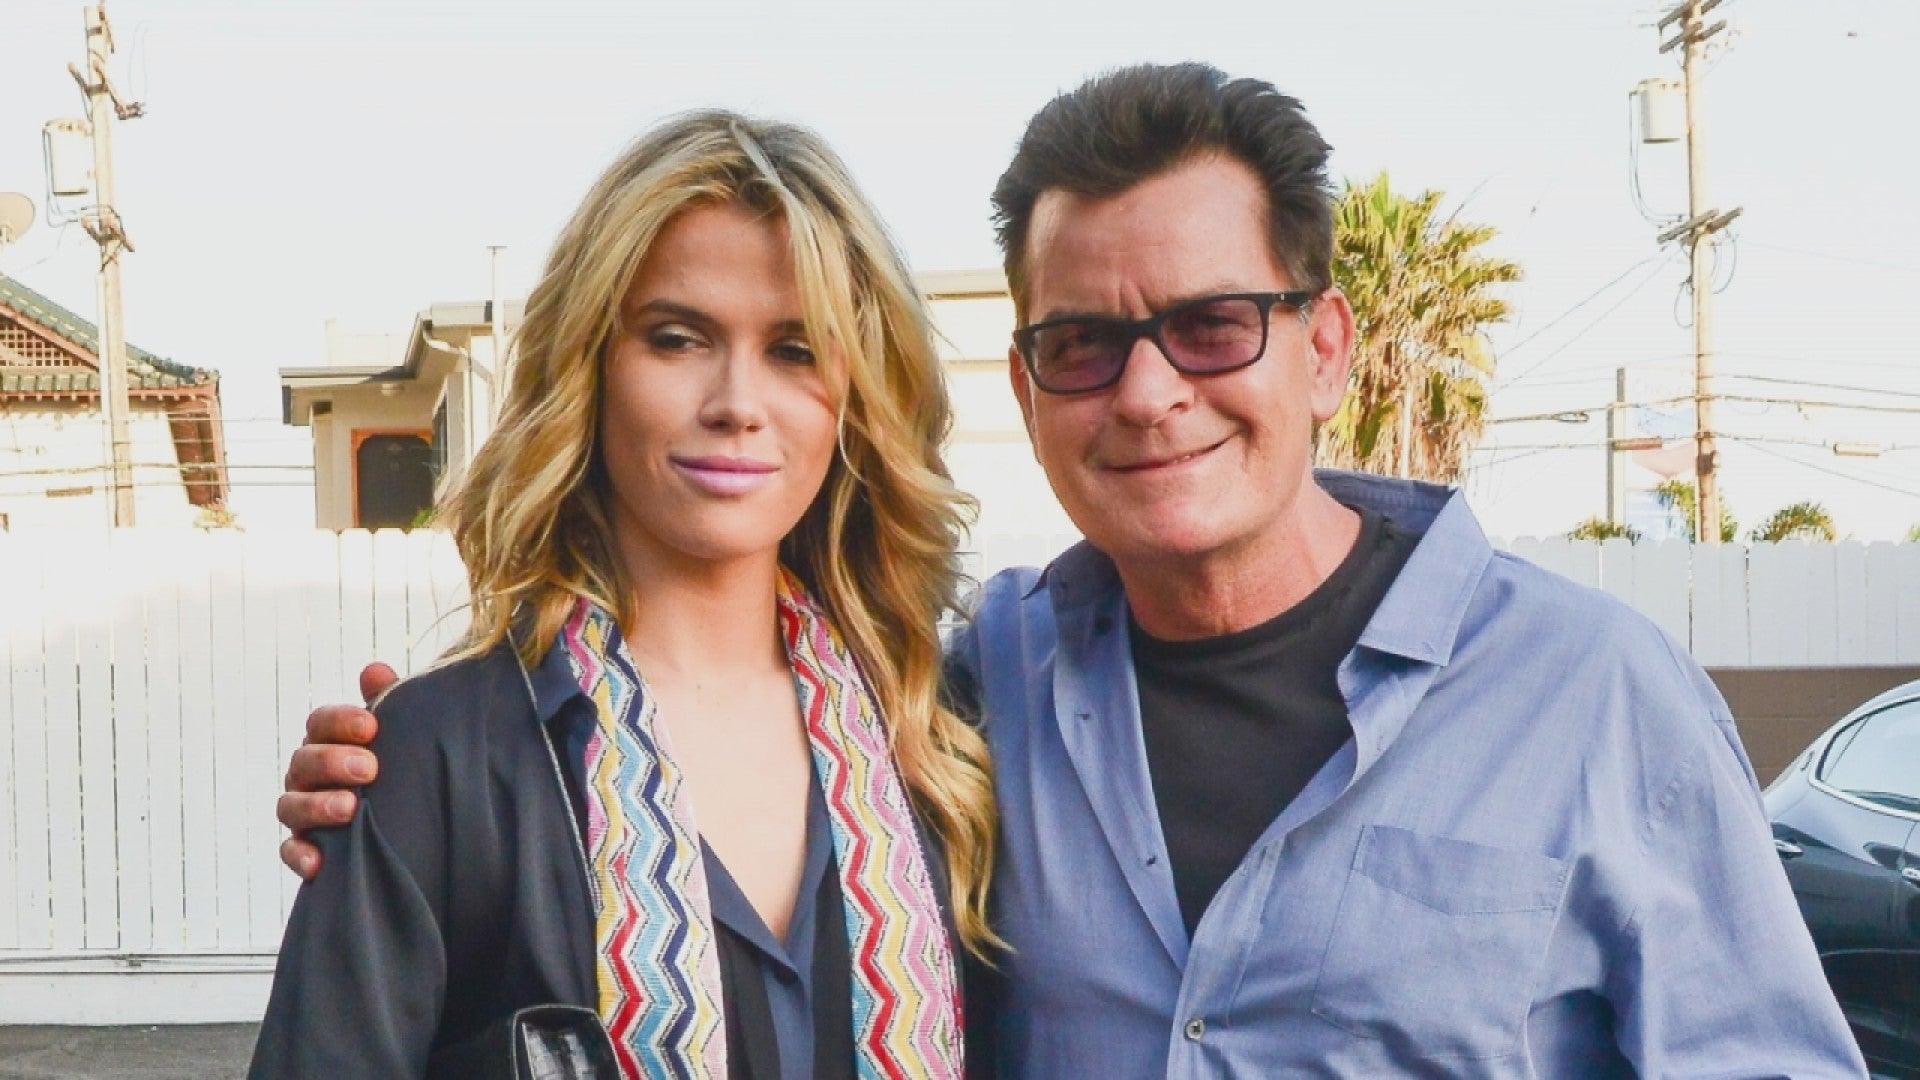 Charlie Sheen Steps Out With New Girlfriend Meet Jules!